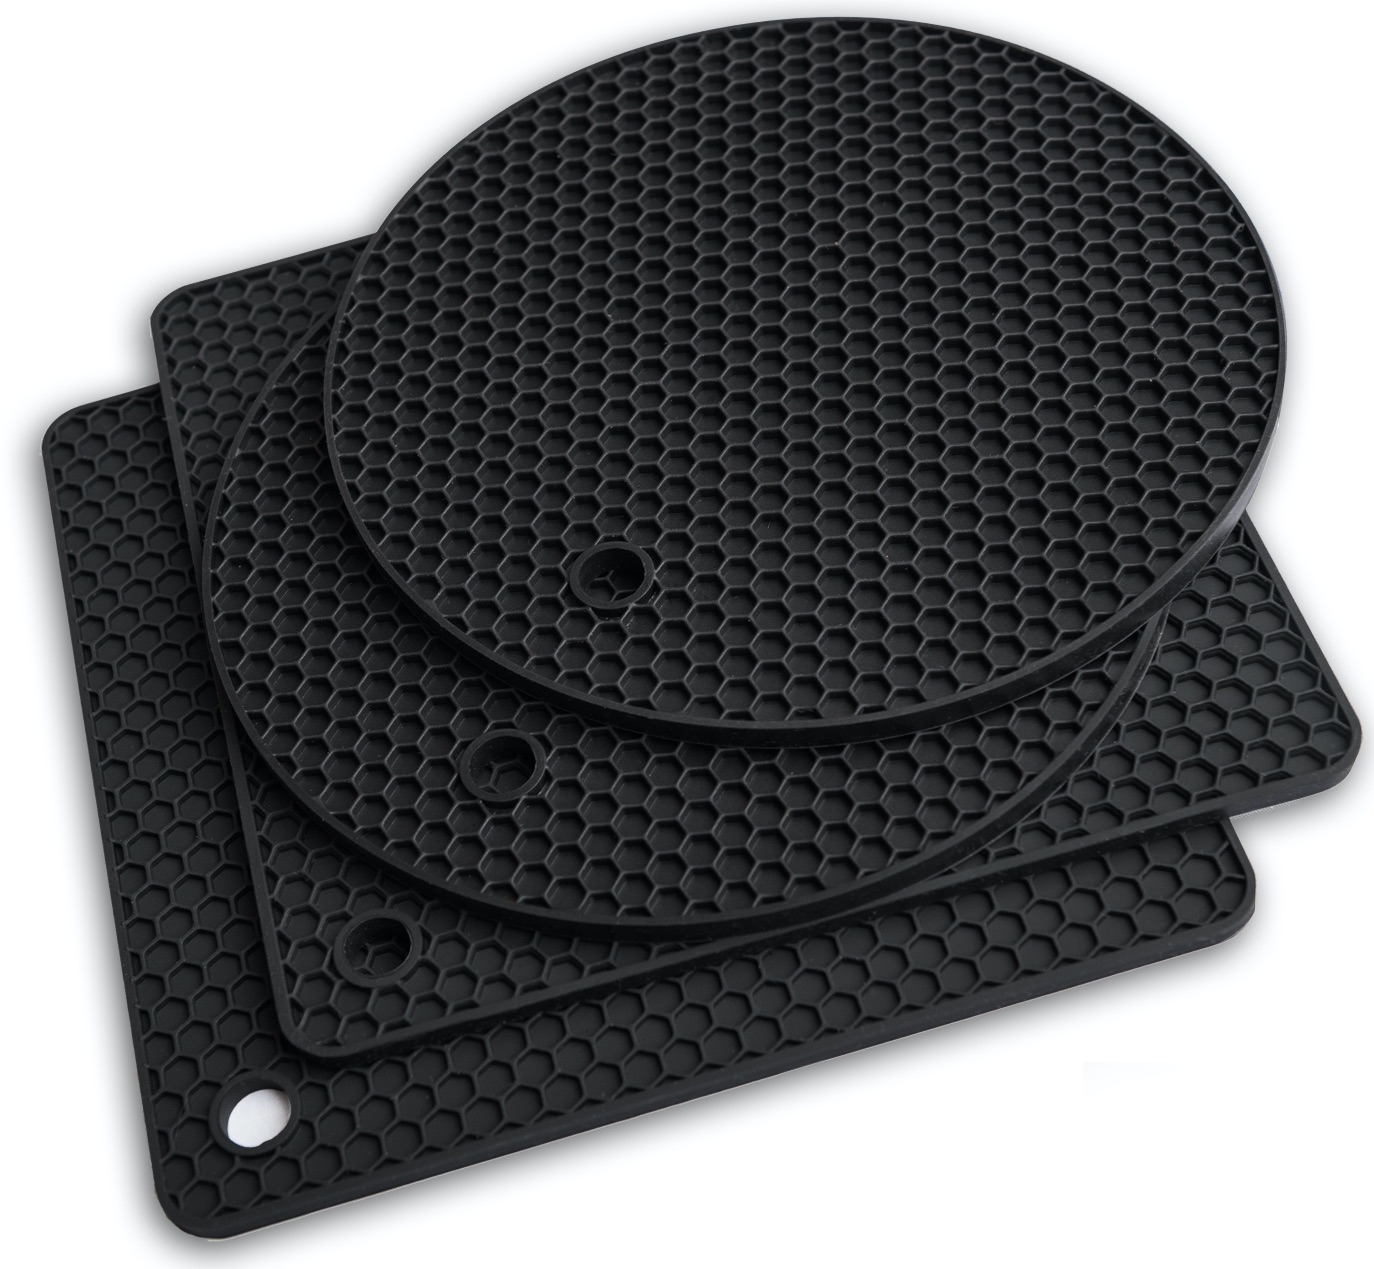 Silicone Trivet Mats – Pot Holders – Drying Mat Our Potholders Kitchen  Tools is Heat Resistant to 440°F, Non-Slip Durable Flexible Easy to wash  and Dry and Contains 4 pcs Caribbean by